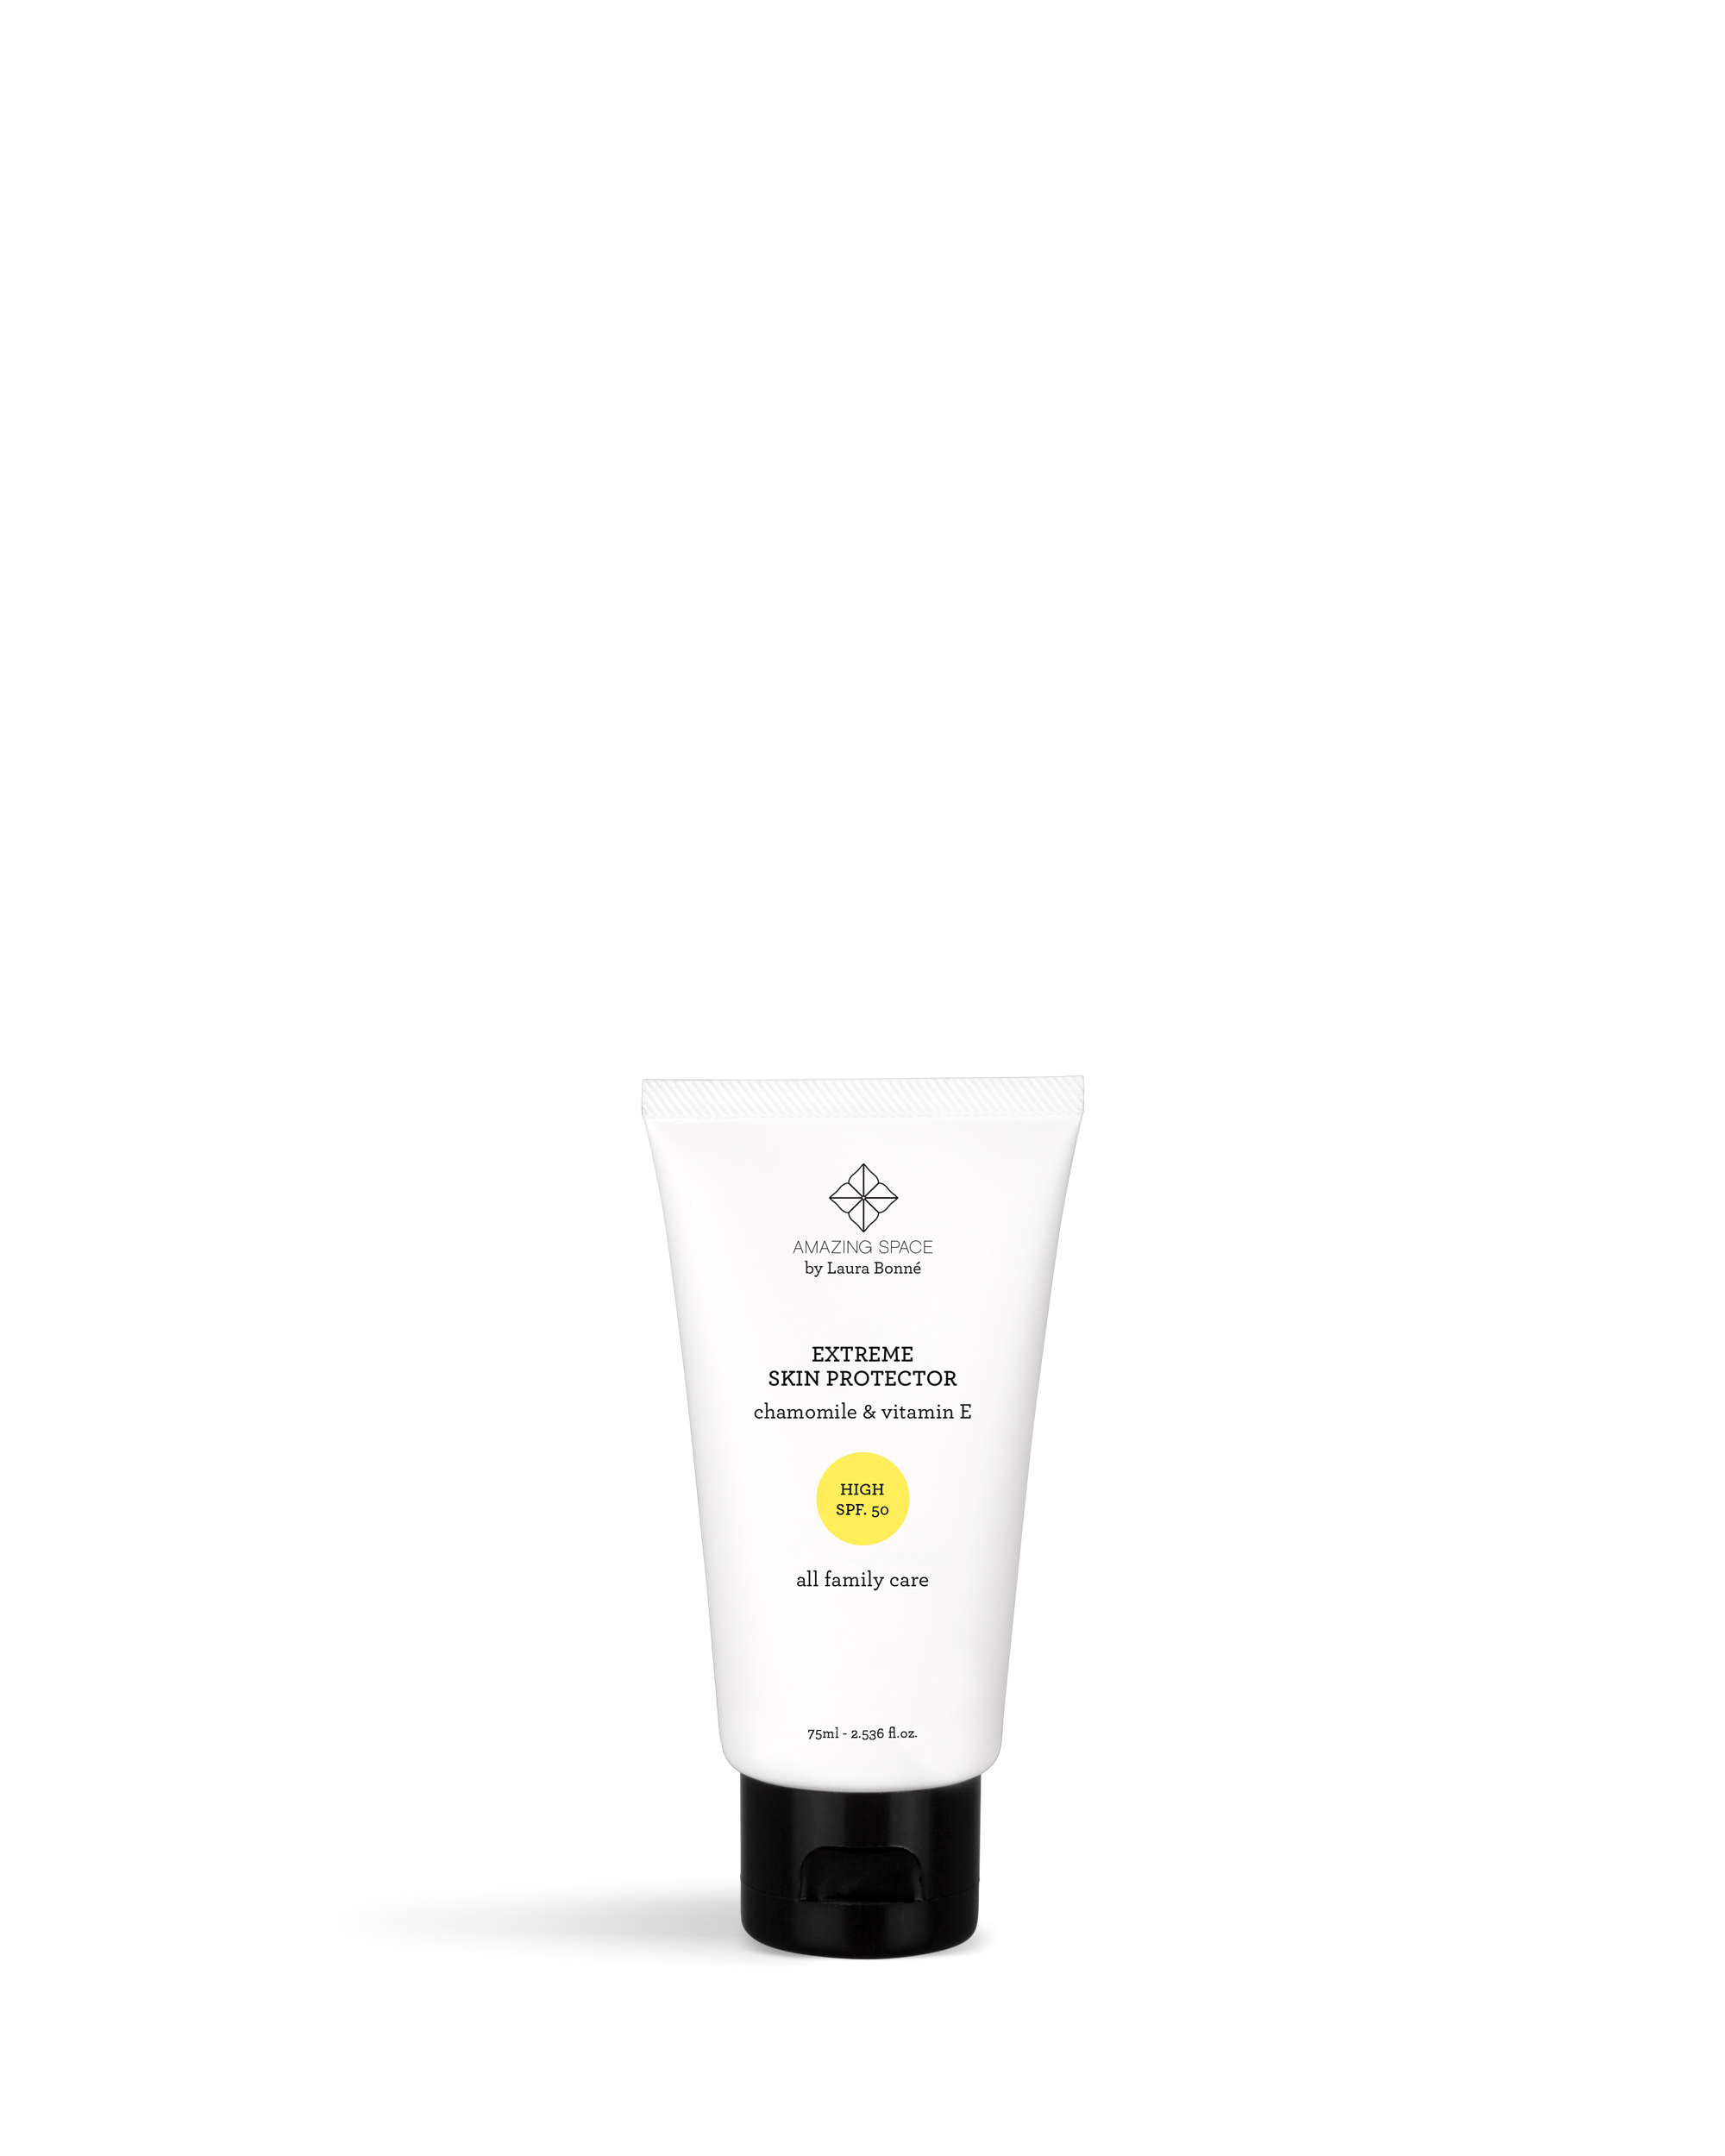 Amazing Space - Extreme Skin Protector SPF 50